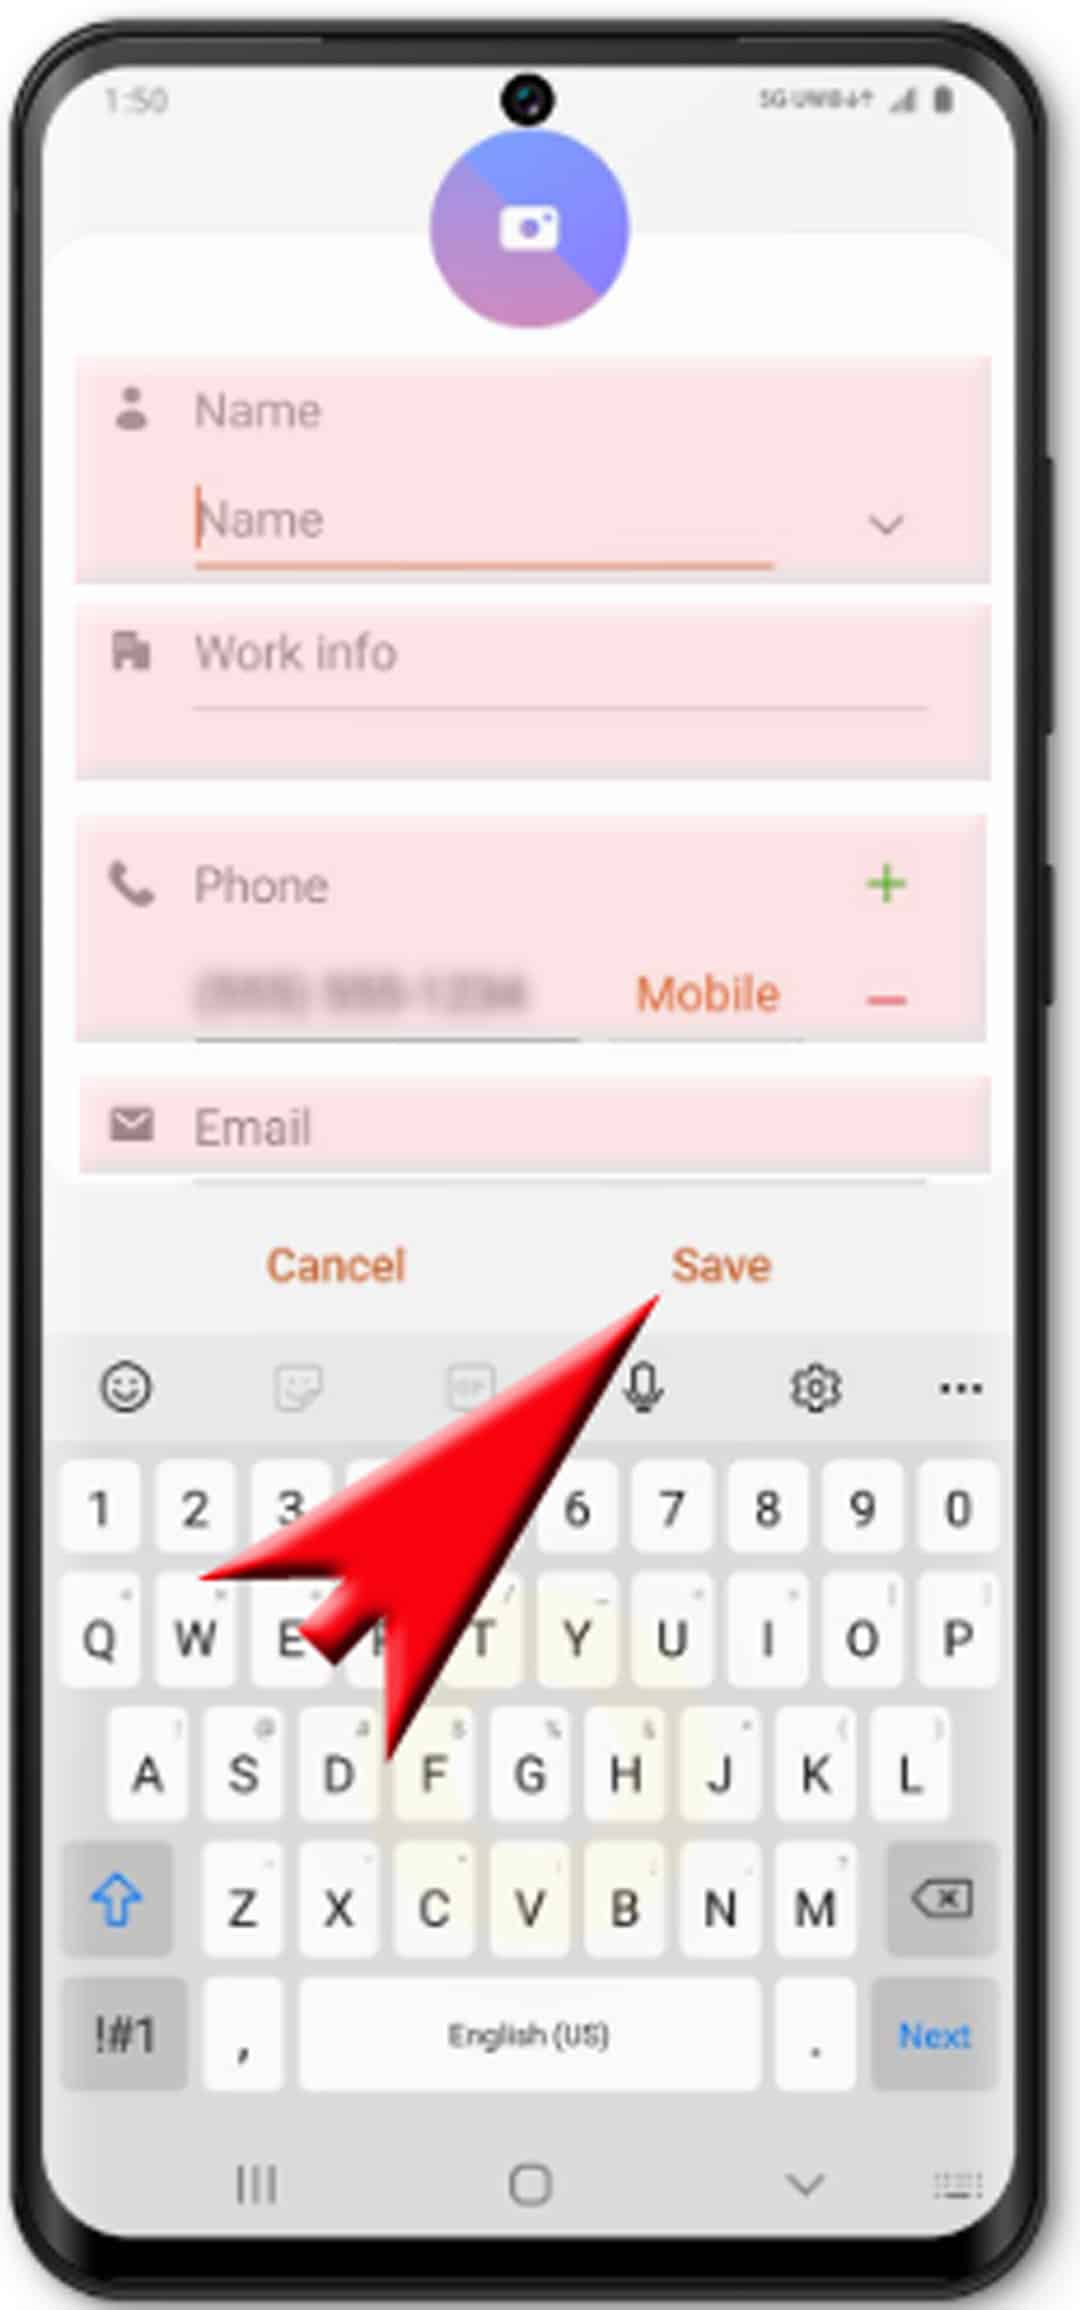 add missed calls as contacts on galaxy s20 - add new contact details